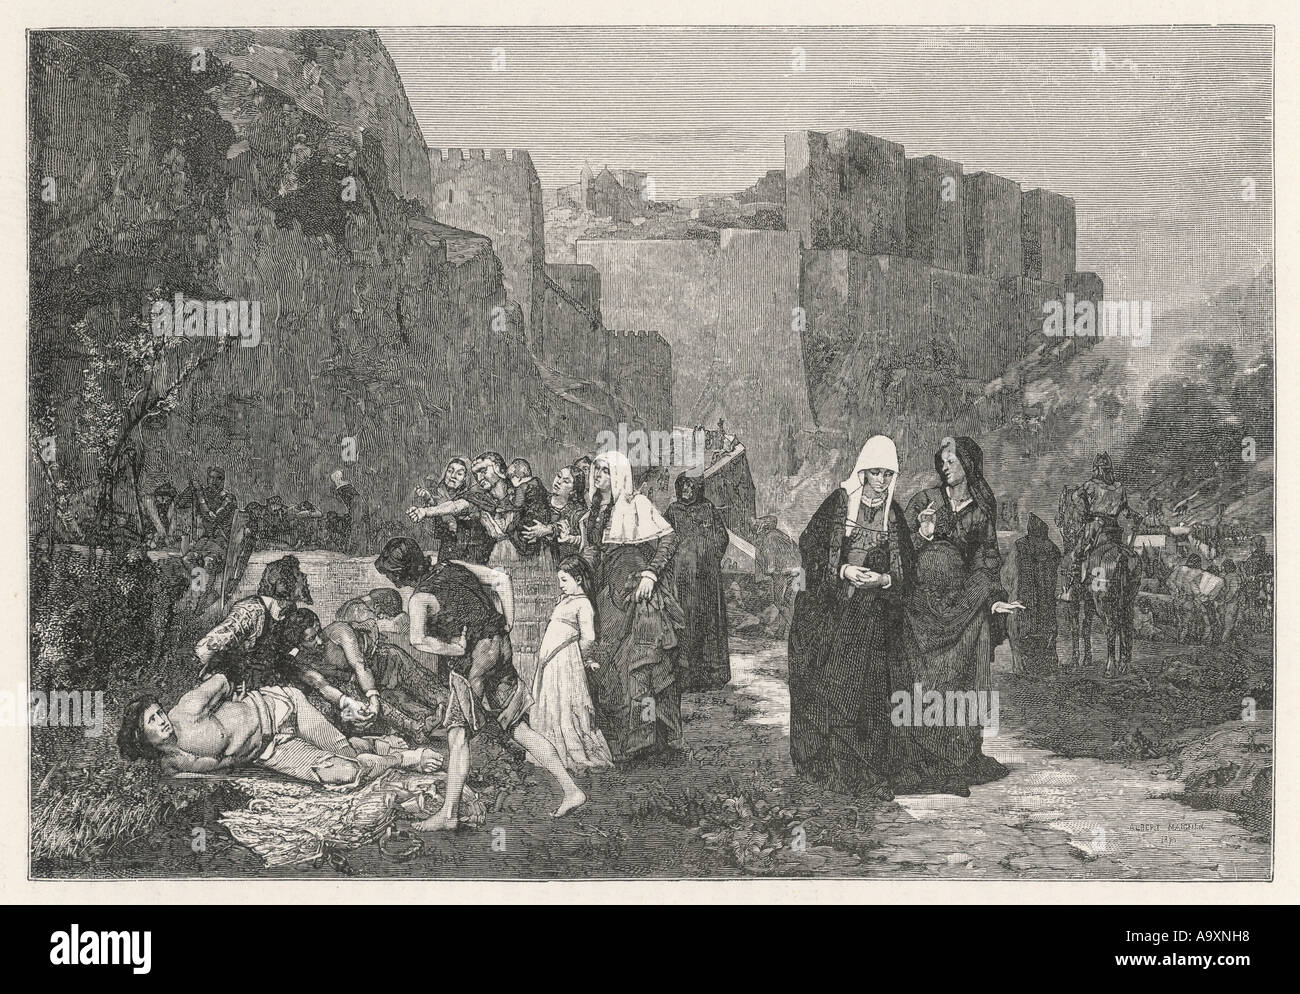 Albigensians Persecuted Stock Photo